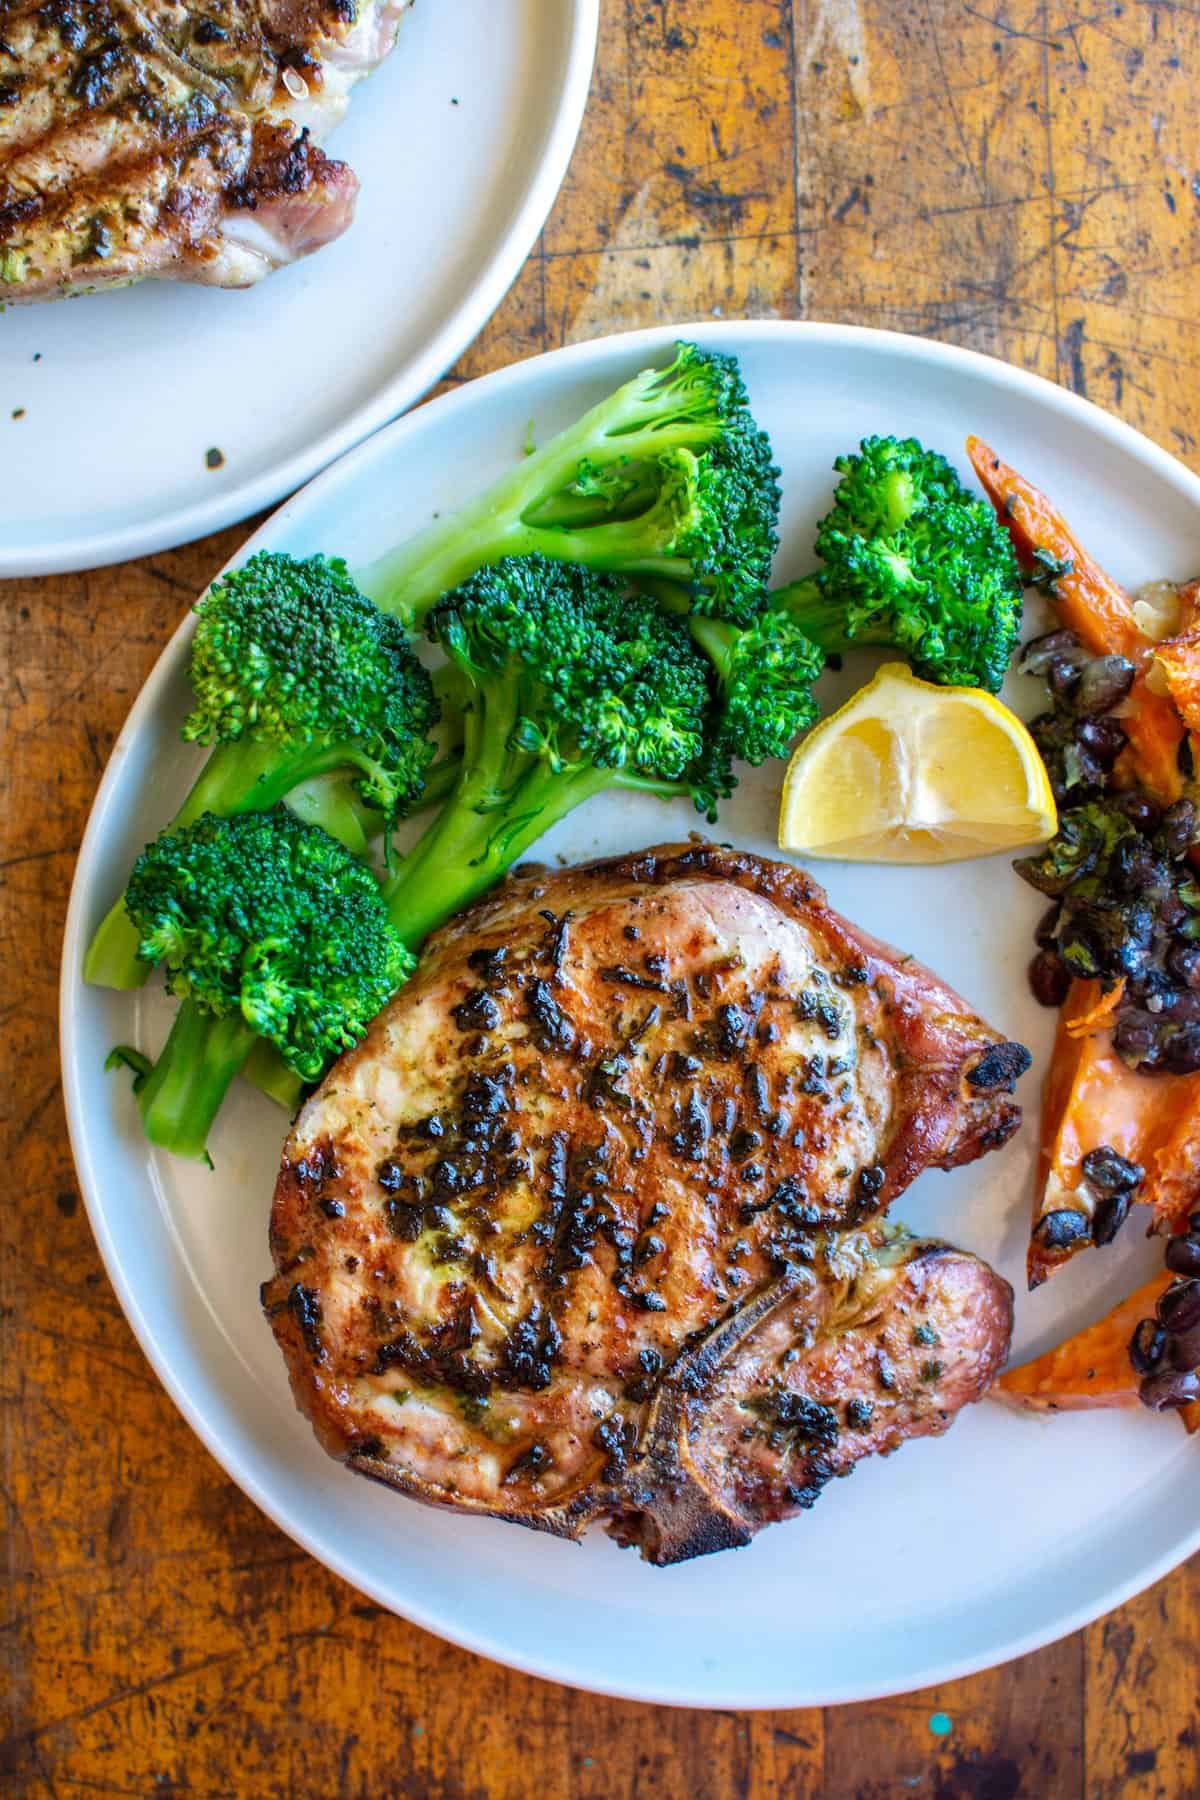 A white plate with a grilled pork chop, broccoli, and a lemon wedge sitting on a wood table with another plate next to it.